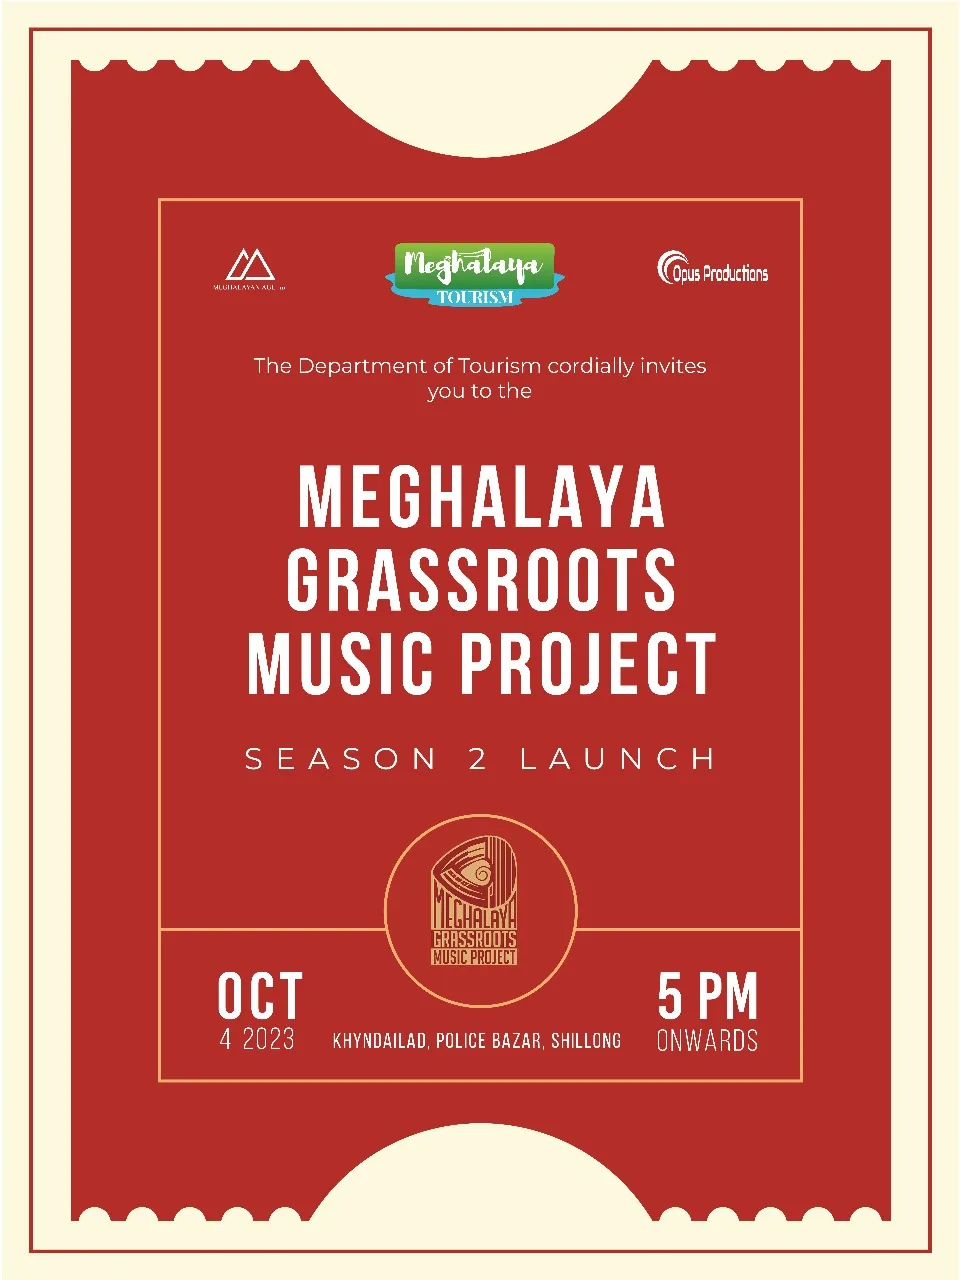 A spectacular Season 2 Launch of The Meghalaya Grassroots Music Project on October 4th